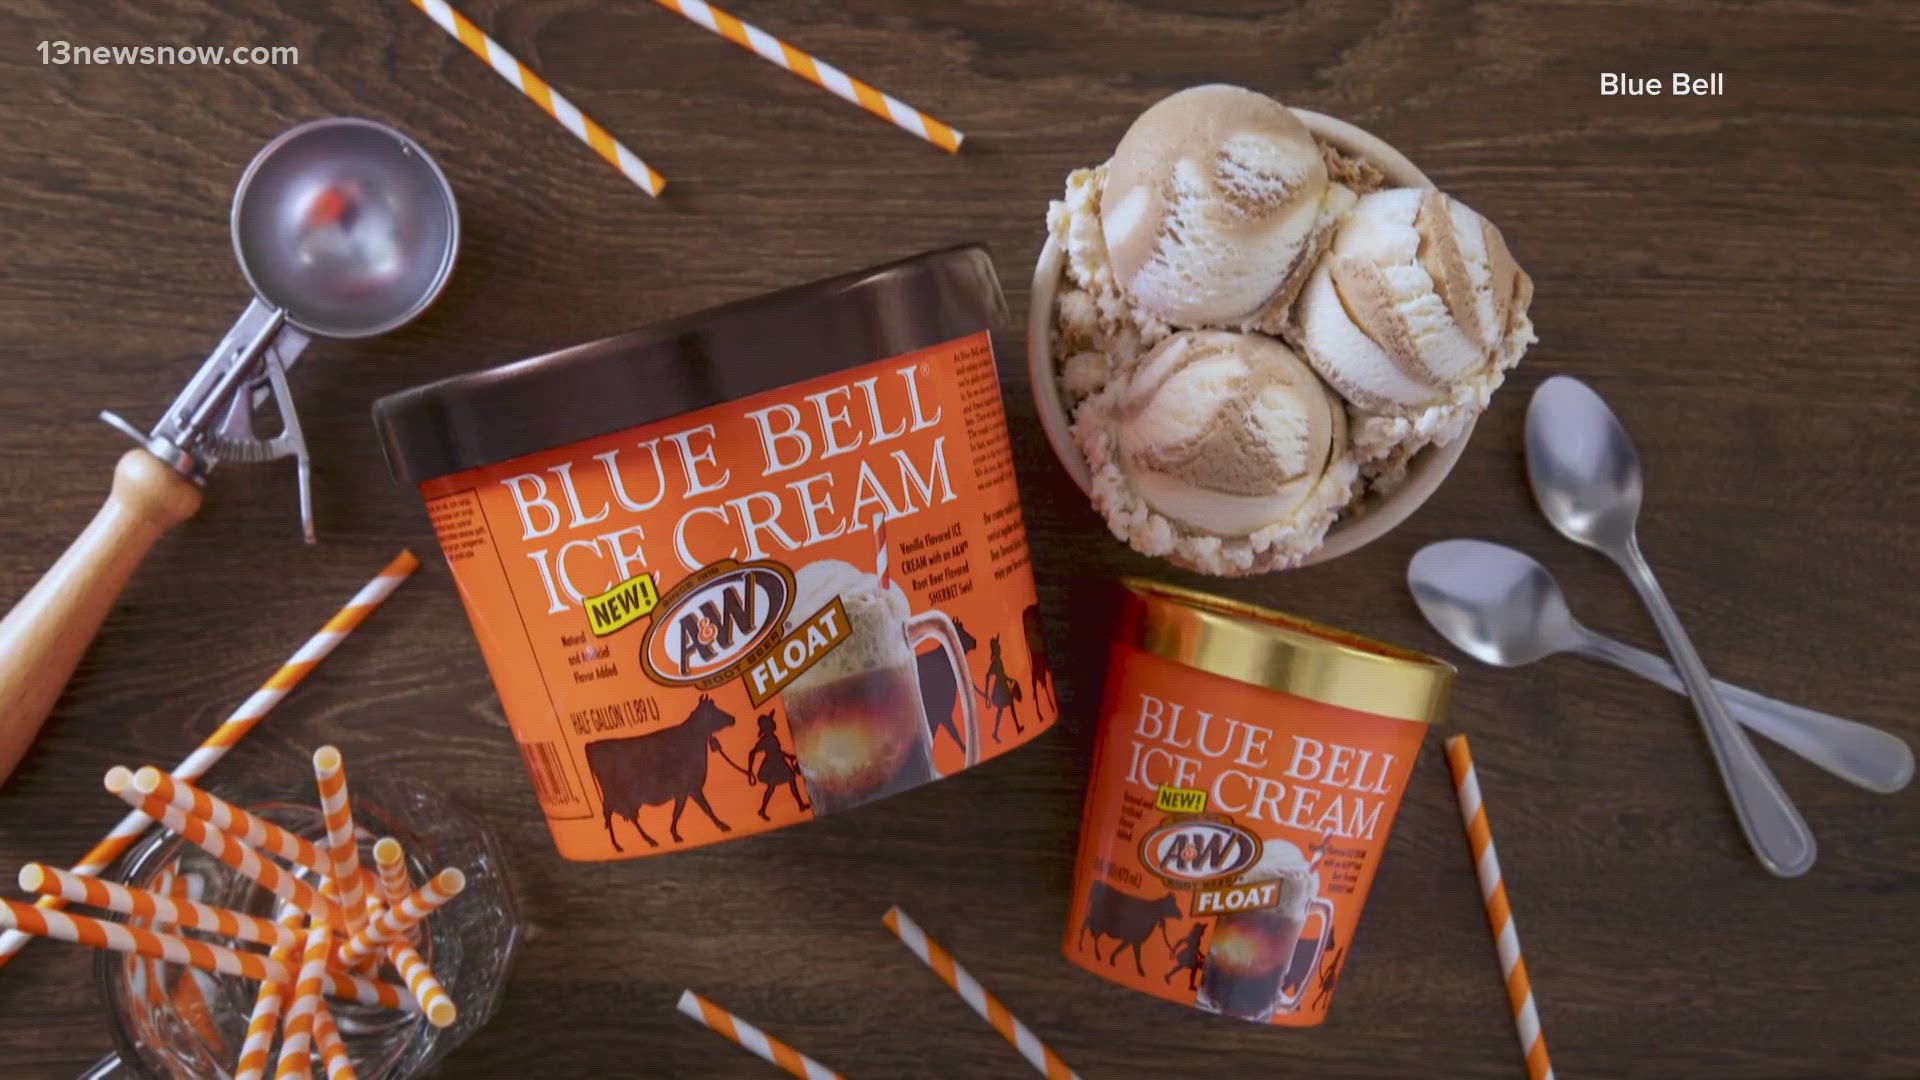 Blue Bell Ice Cream is releasing a new flavor: "A&W Root Beer Float Ice Cream." No root beer required.